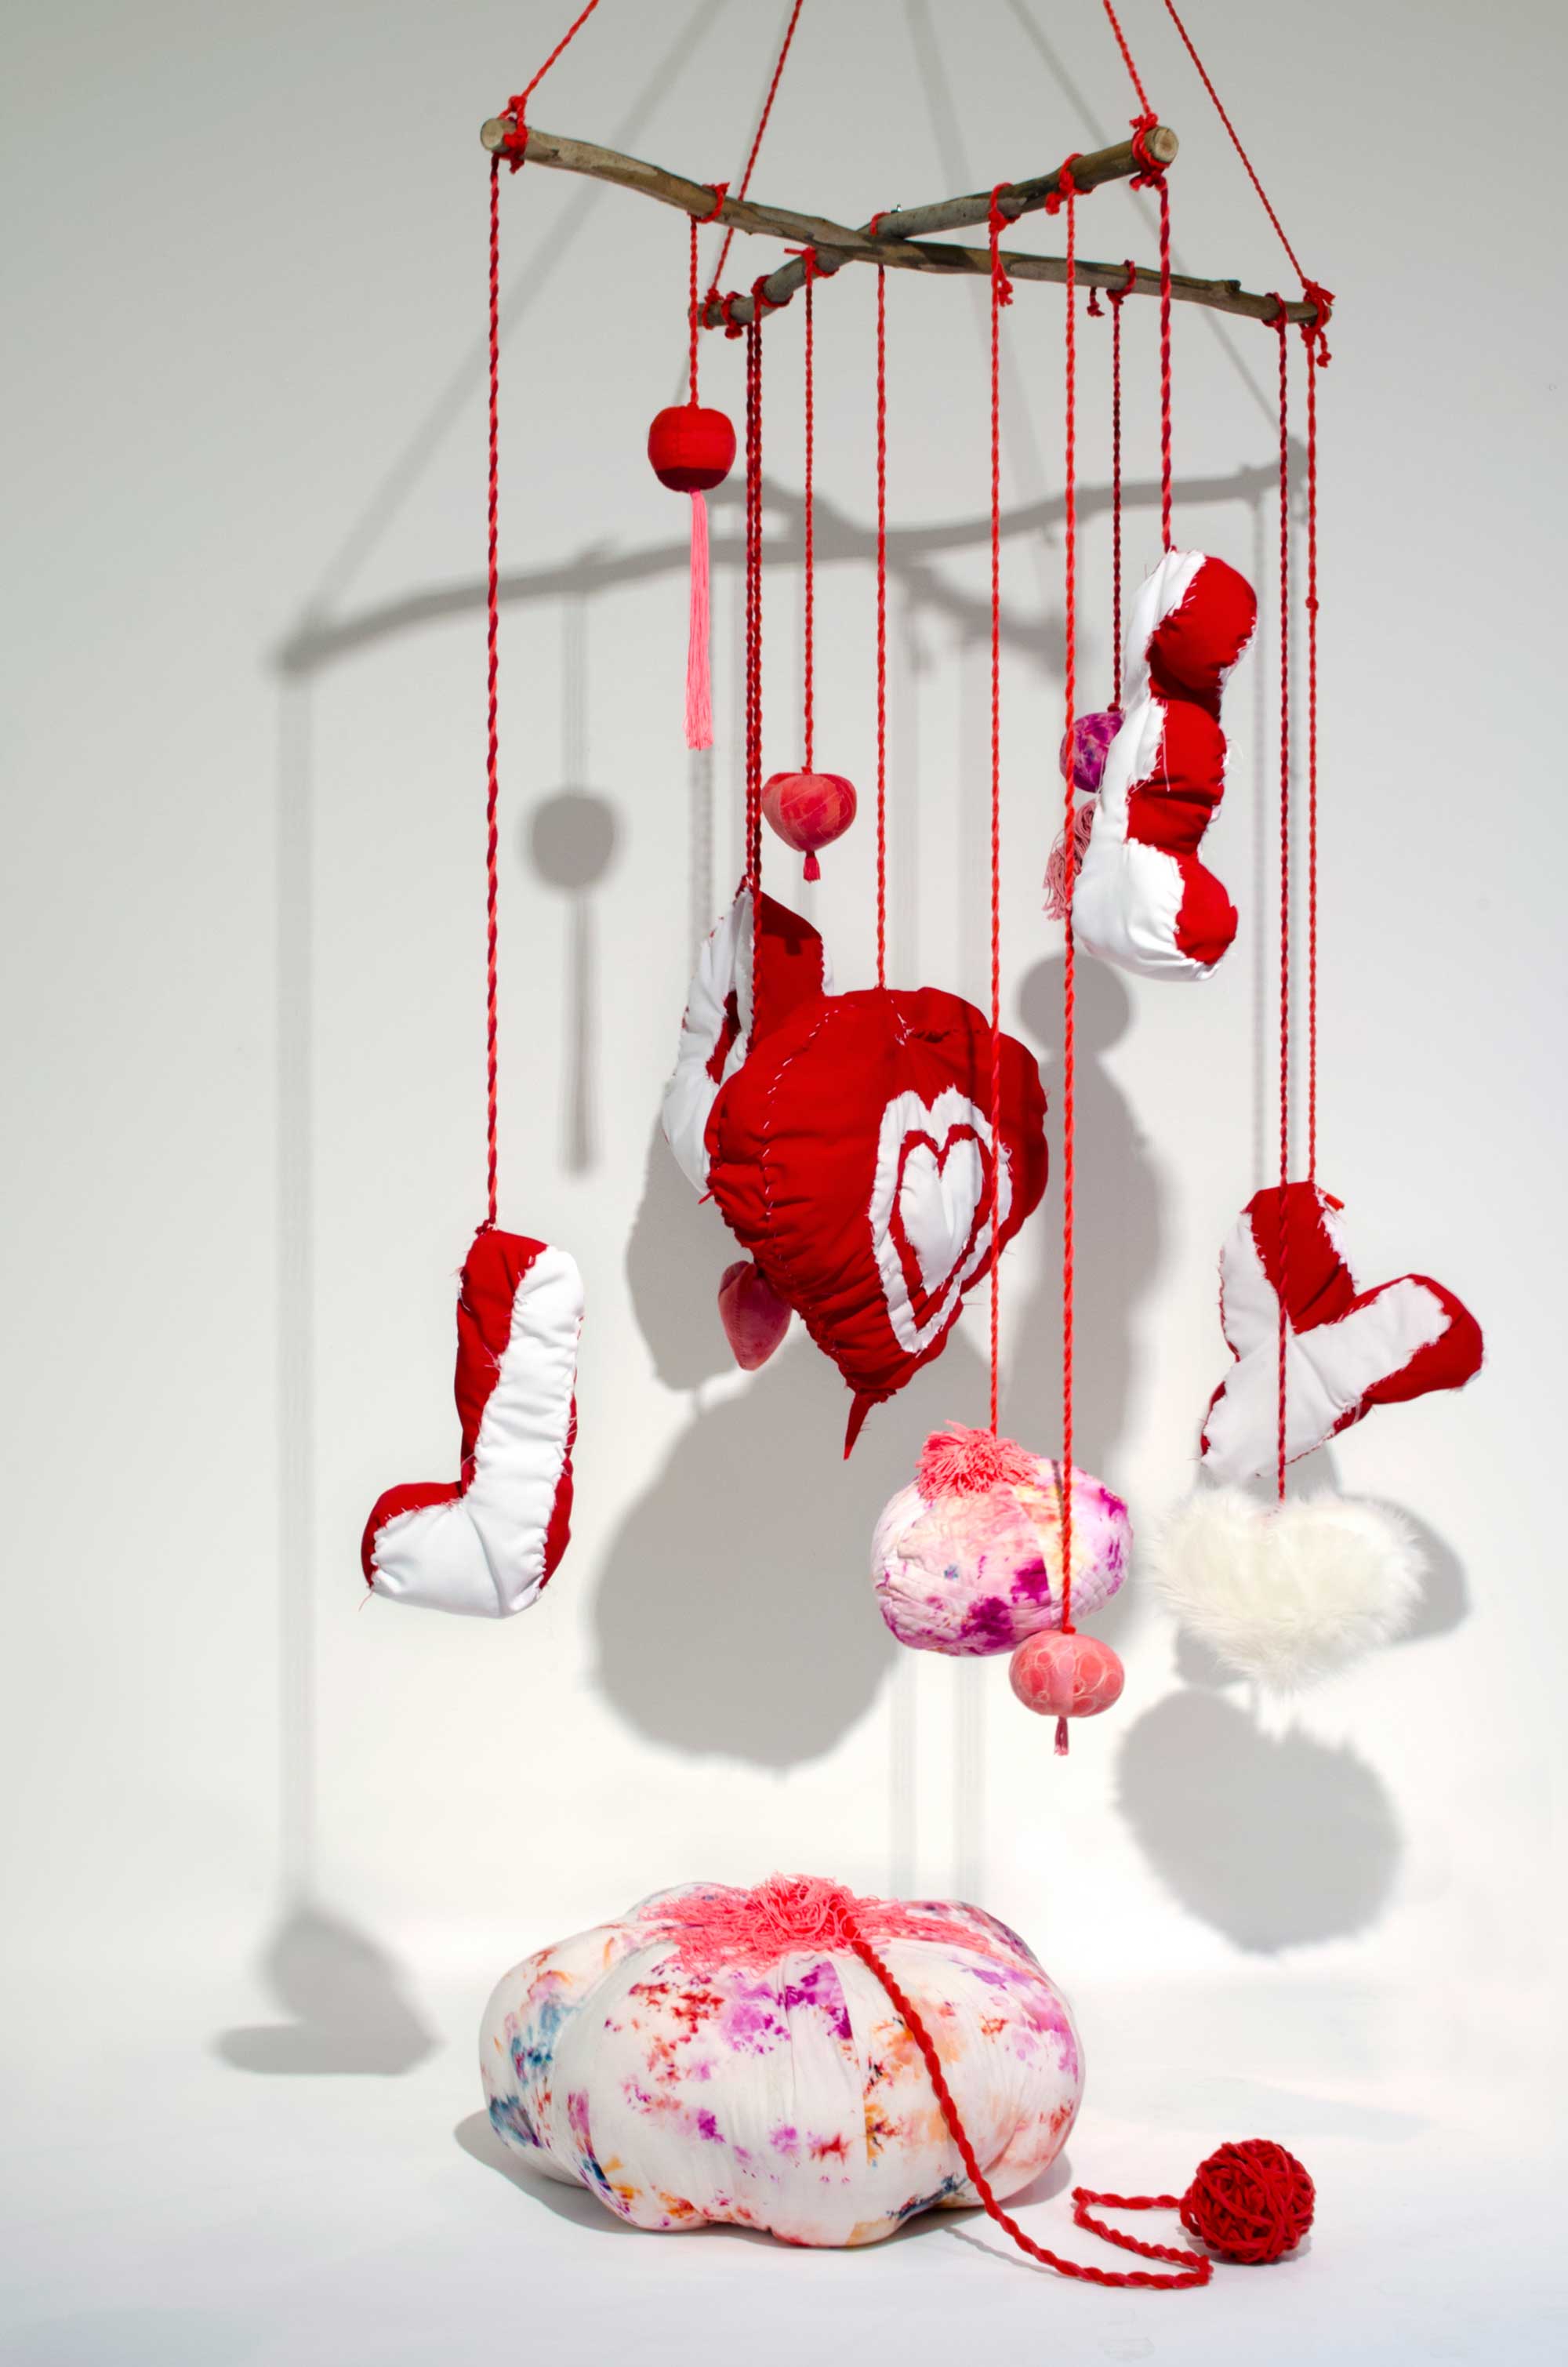 'Love Mobile' 2020, Mark Smith and Dell Stewart, ice-dyed cotton, polyester fill and trims, cotton rope, dimensions variable. Photo: courtesy of Tamworth Regional Gallery.